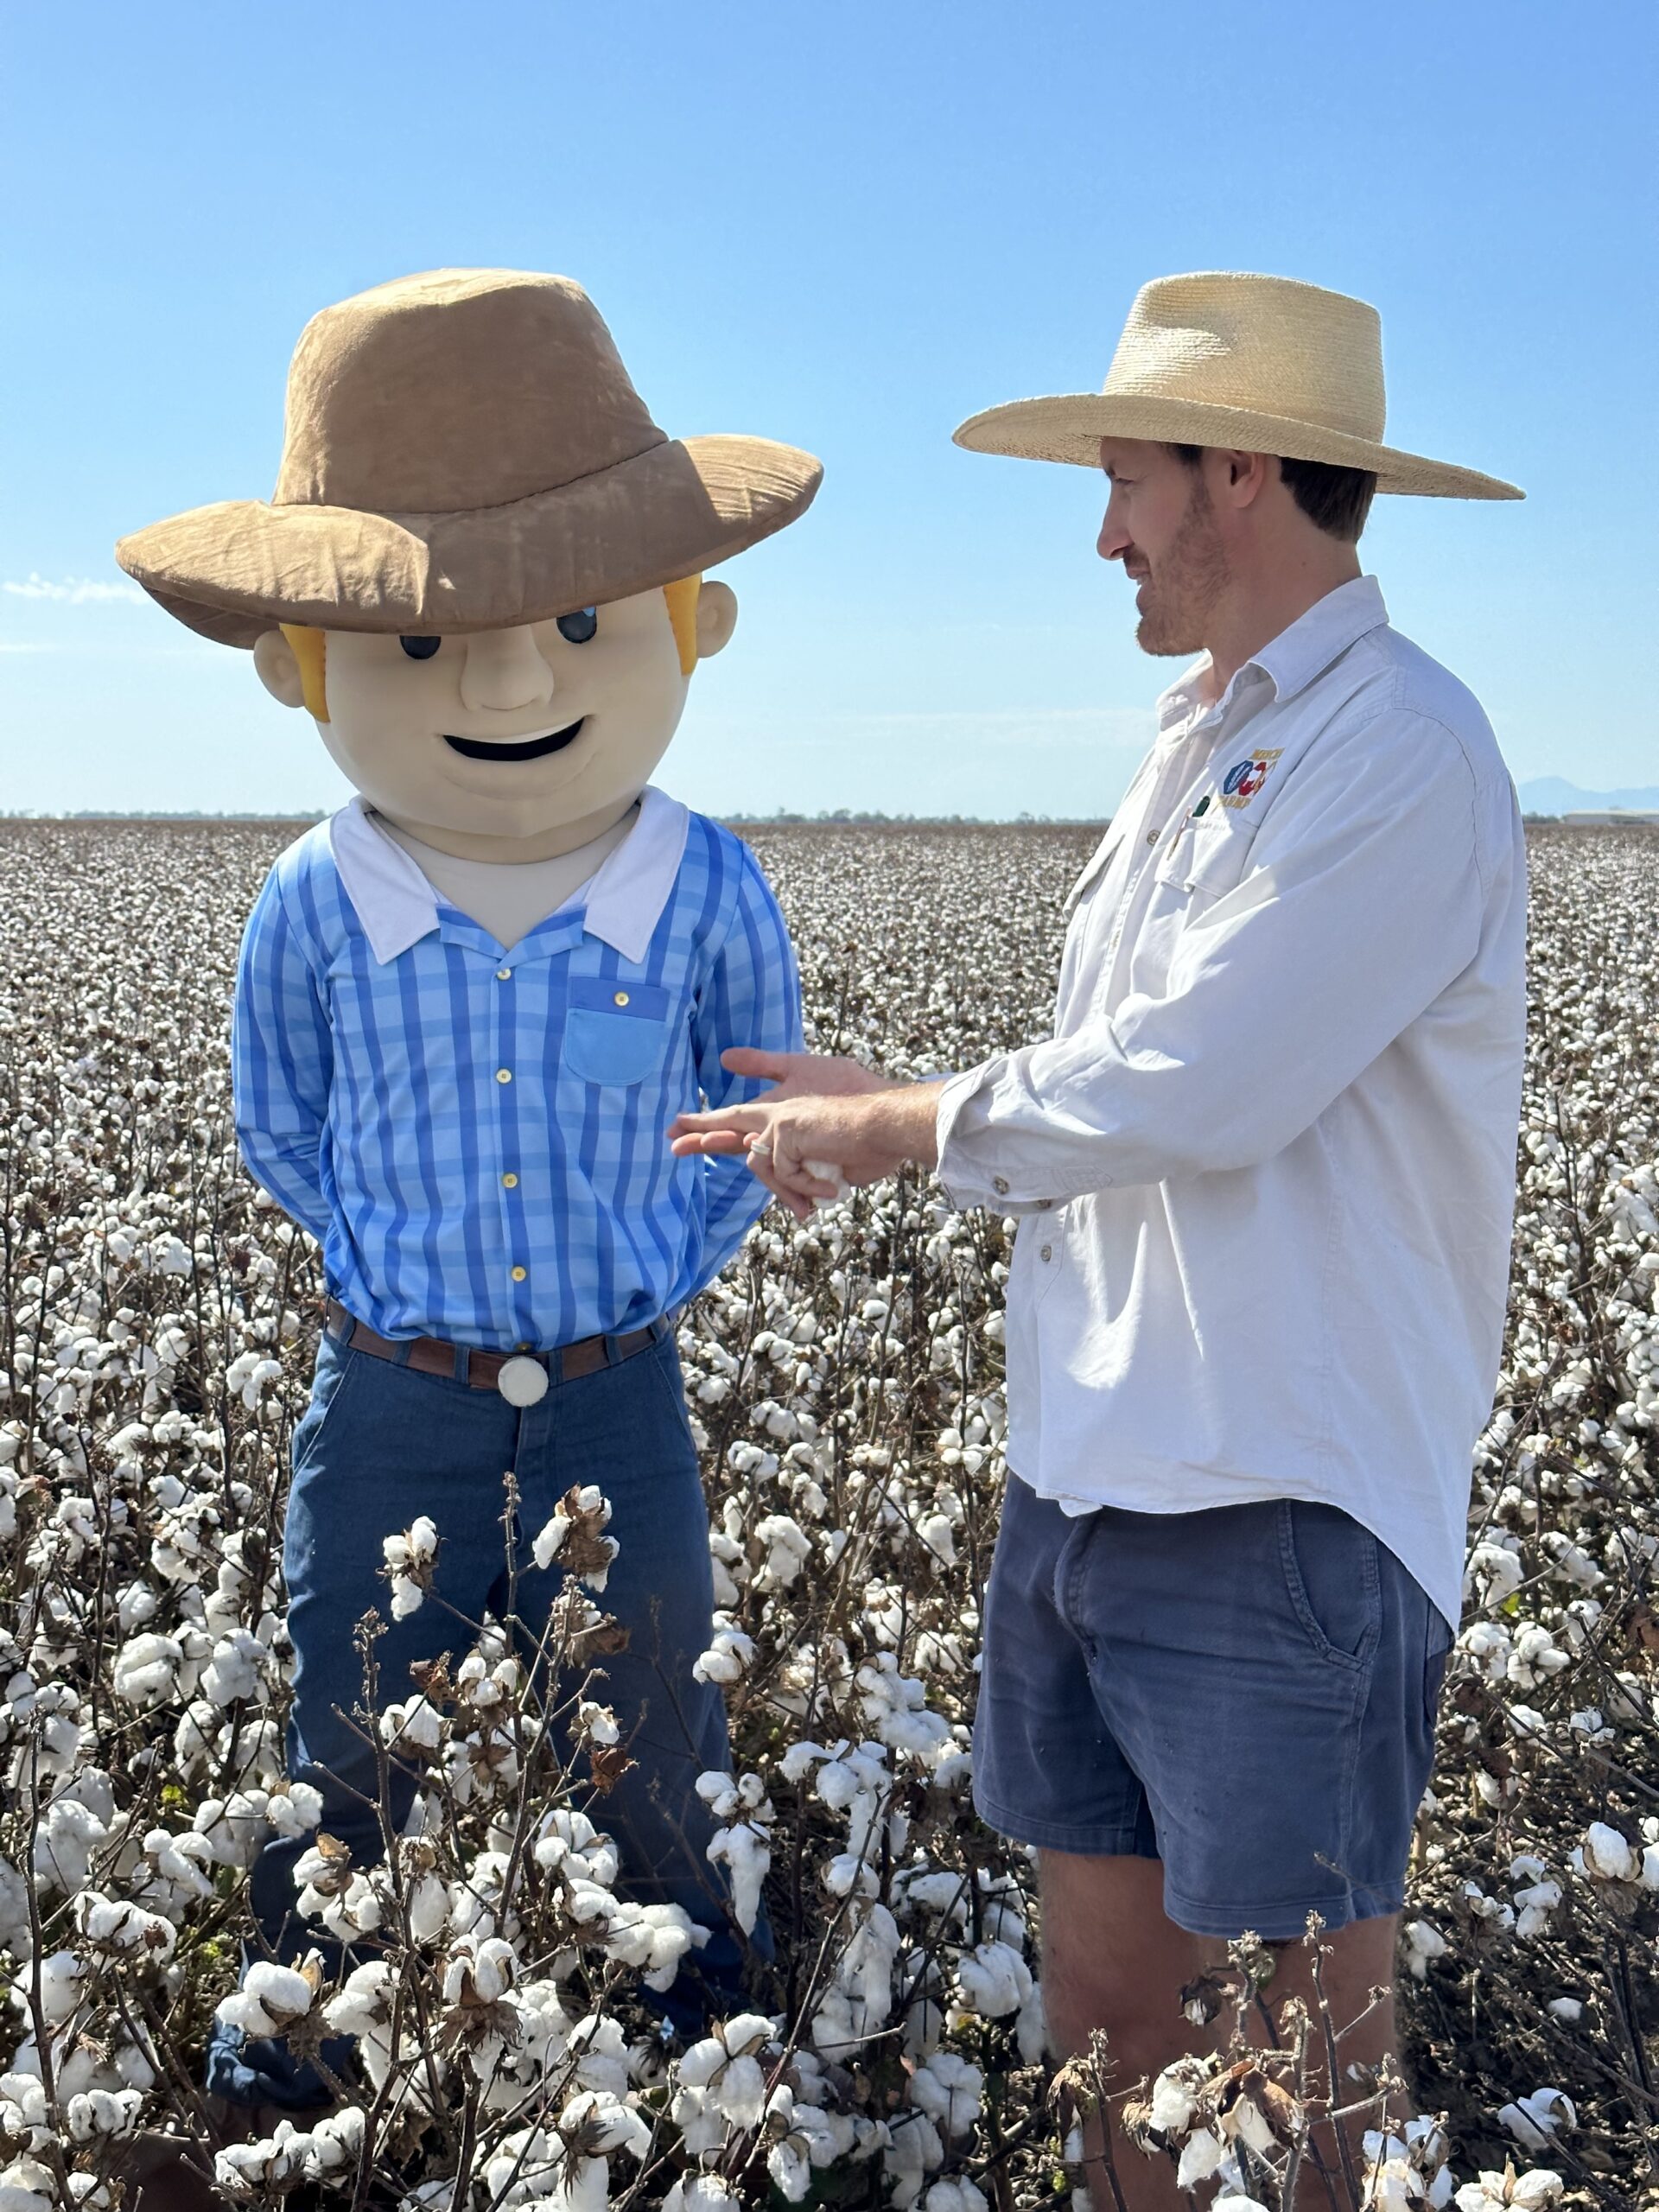 George the Farmer gives the Cotton Capital a big thumbs up - The Courier